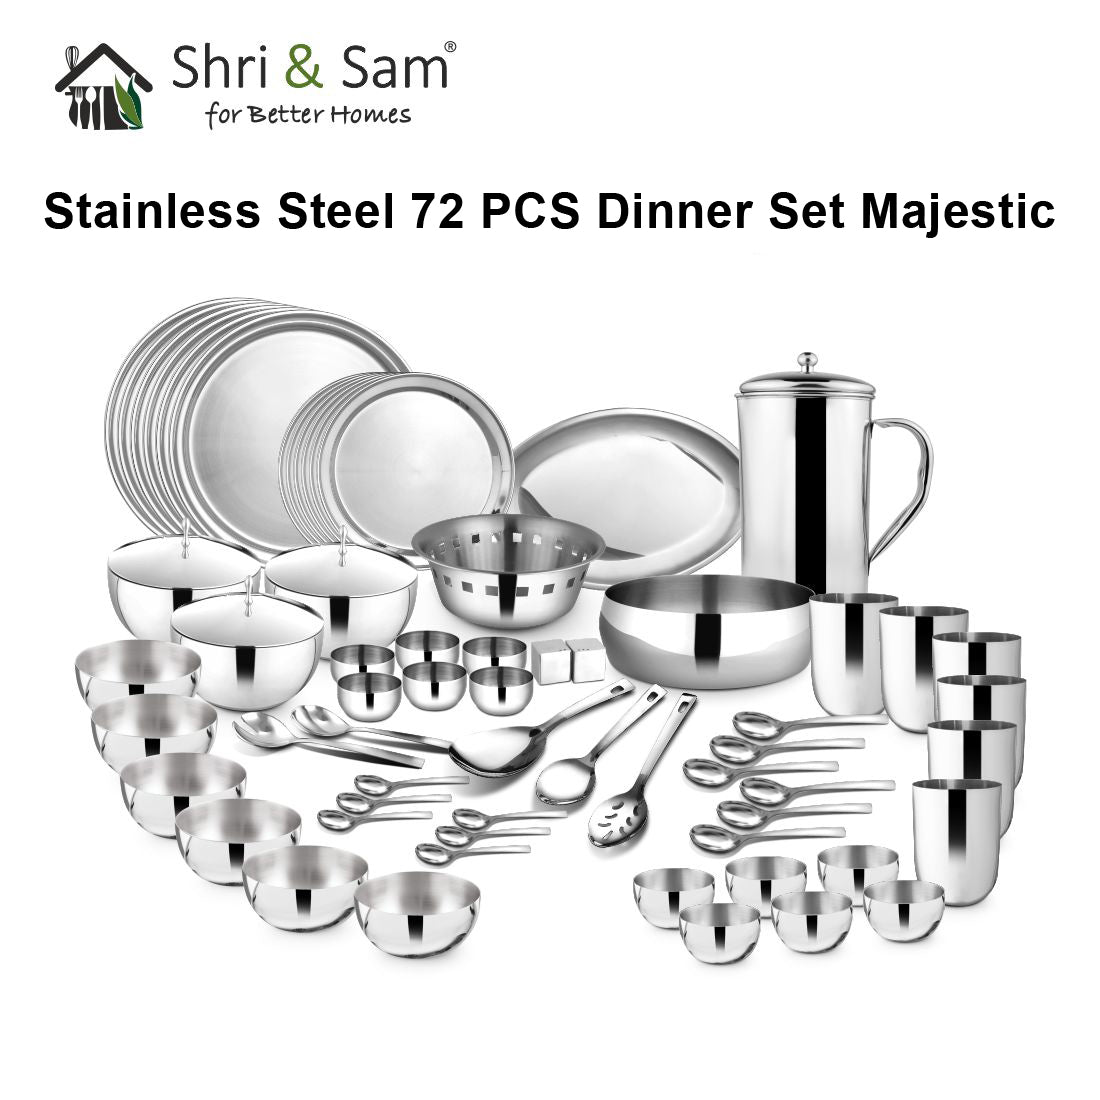 Stainless Steel 72 PCS Dinner Set (6 People) Majestic